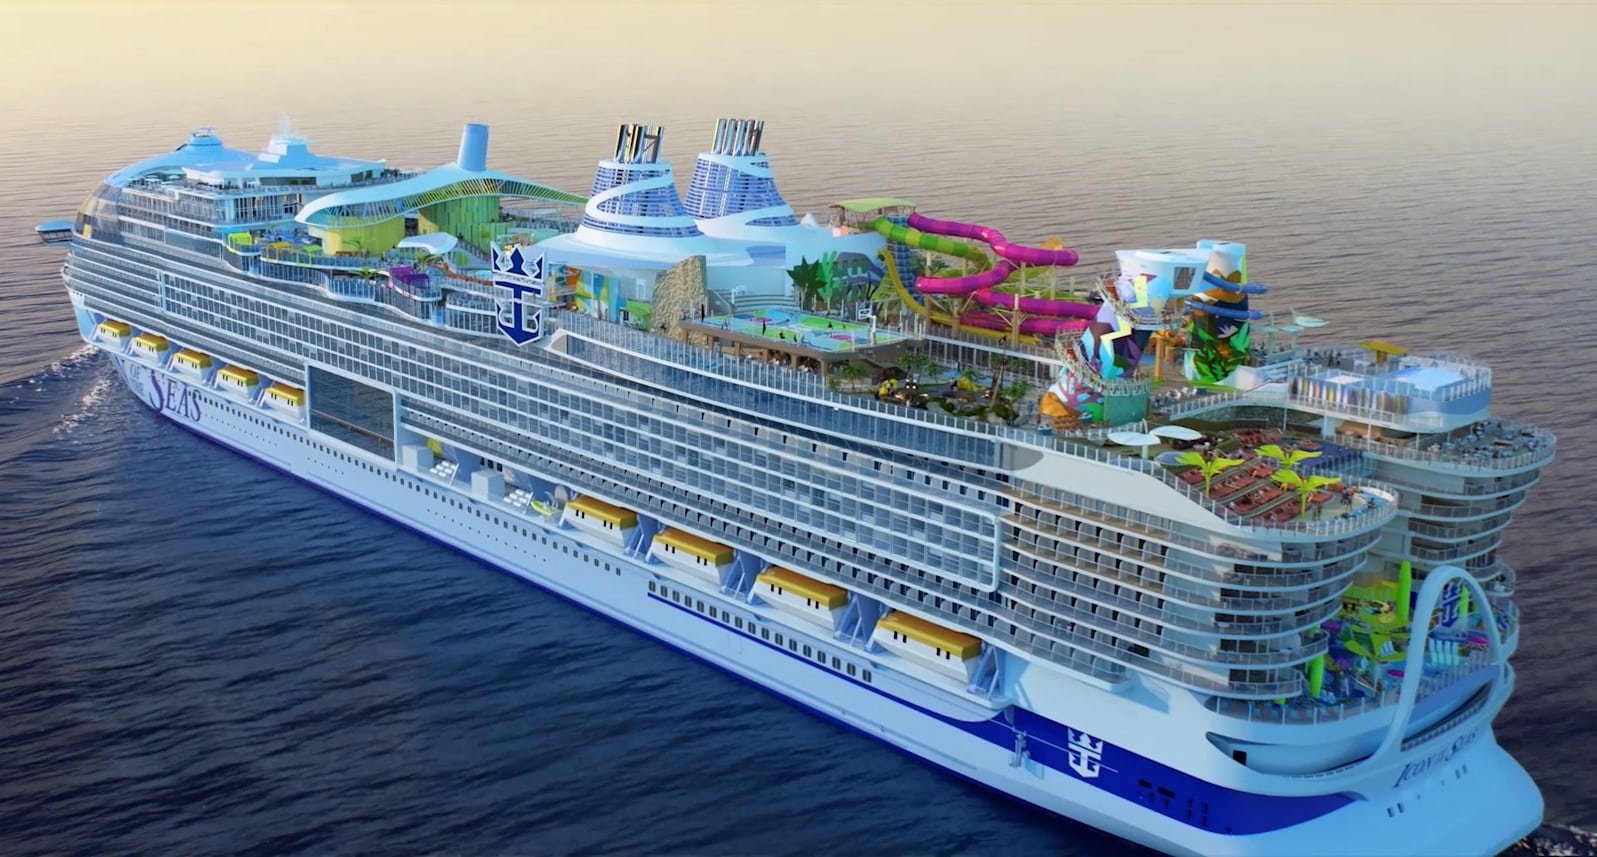 Icon of the Seas, the largest cruise ship in the world to call at